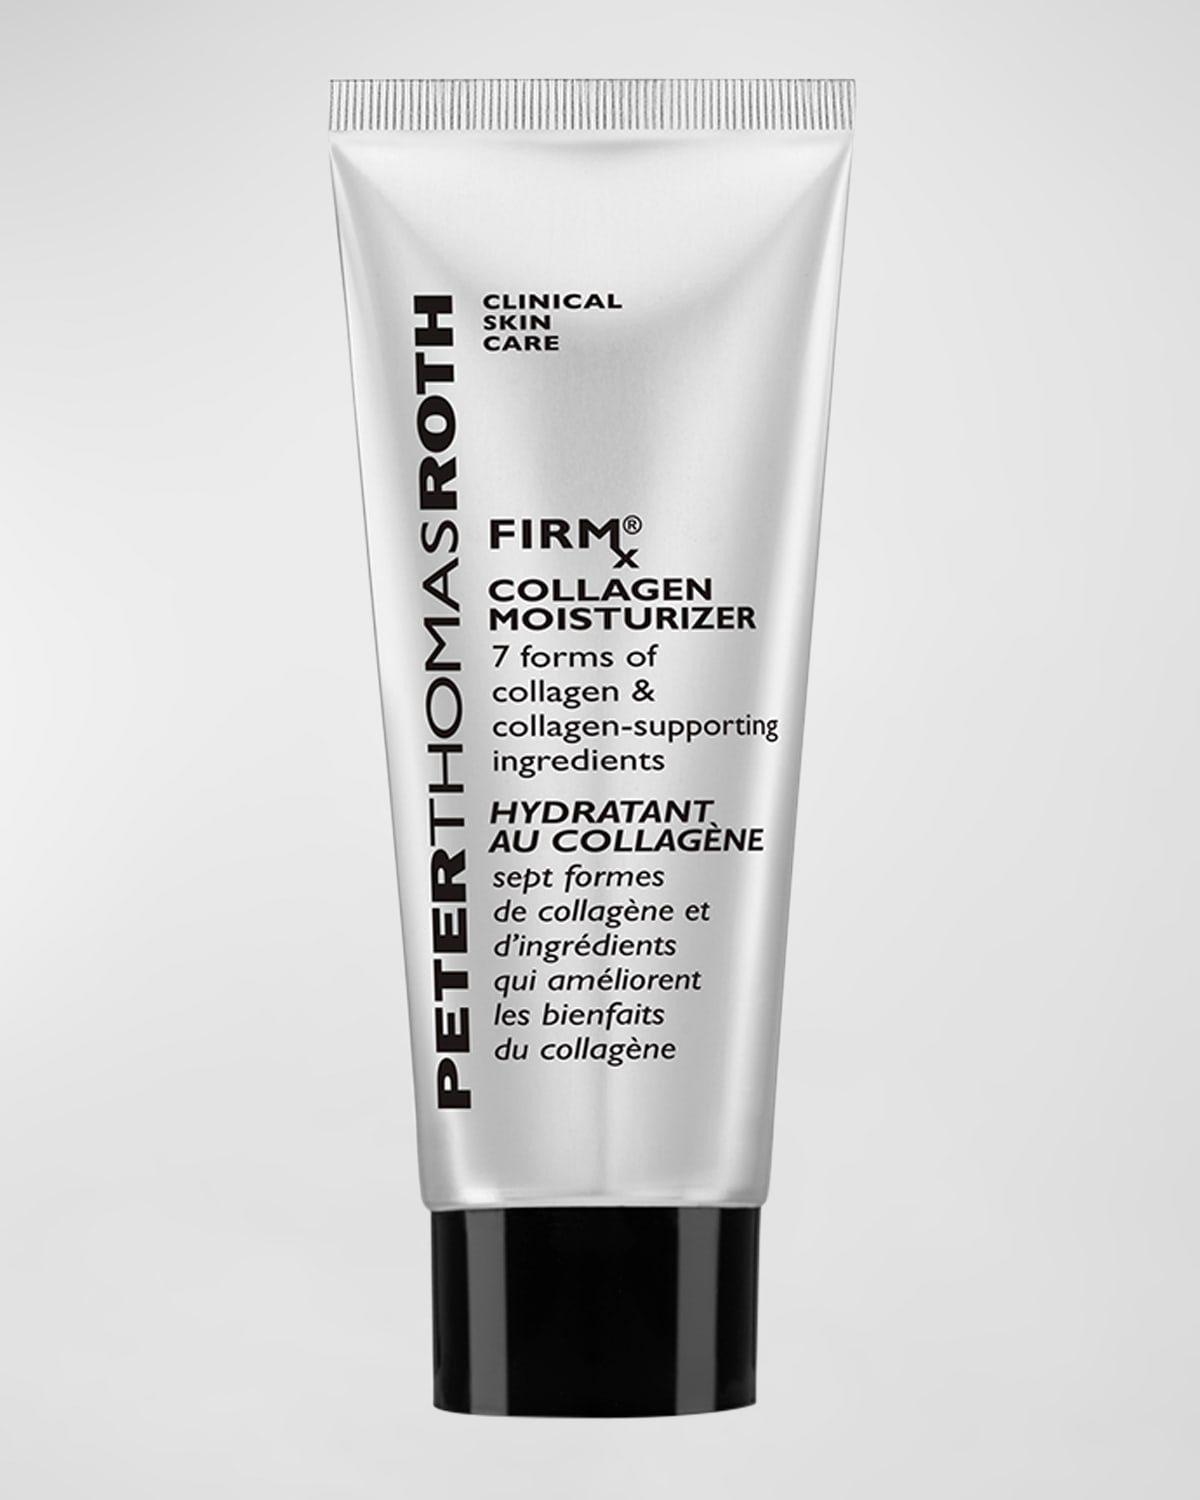 FirmX Collagen Moisturizer, Yours with any $50 Peter Thomas Roth Purchase